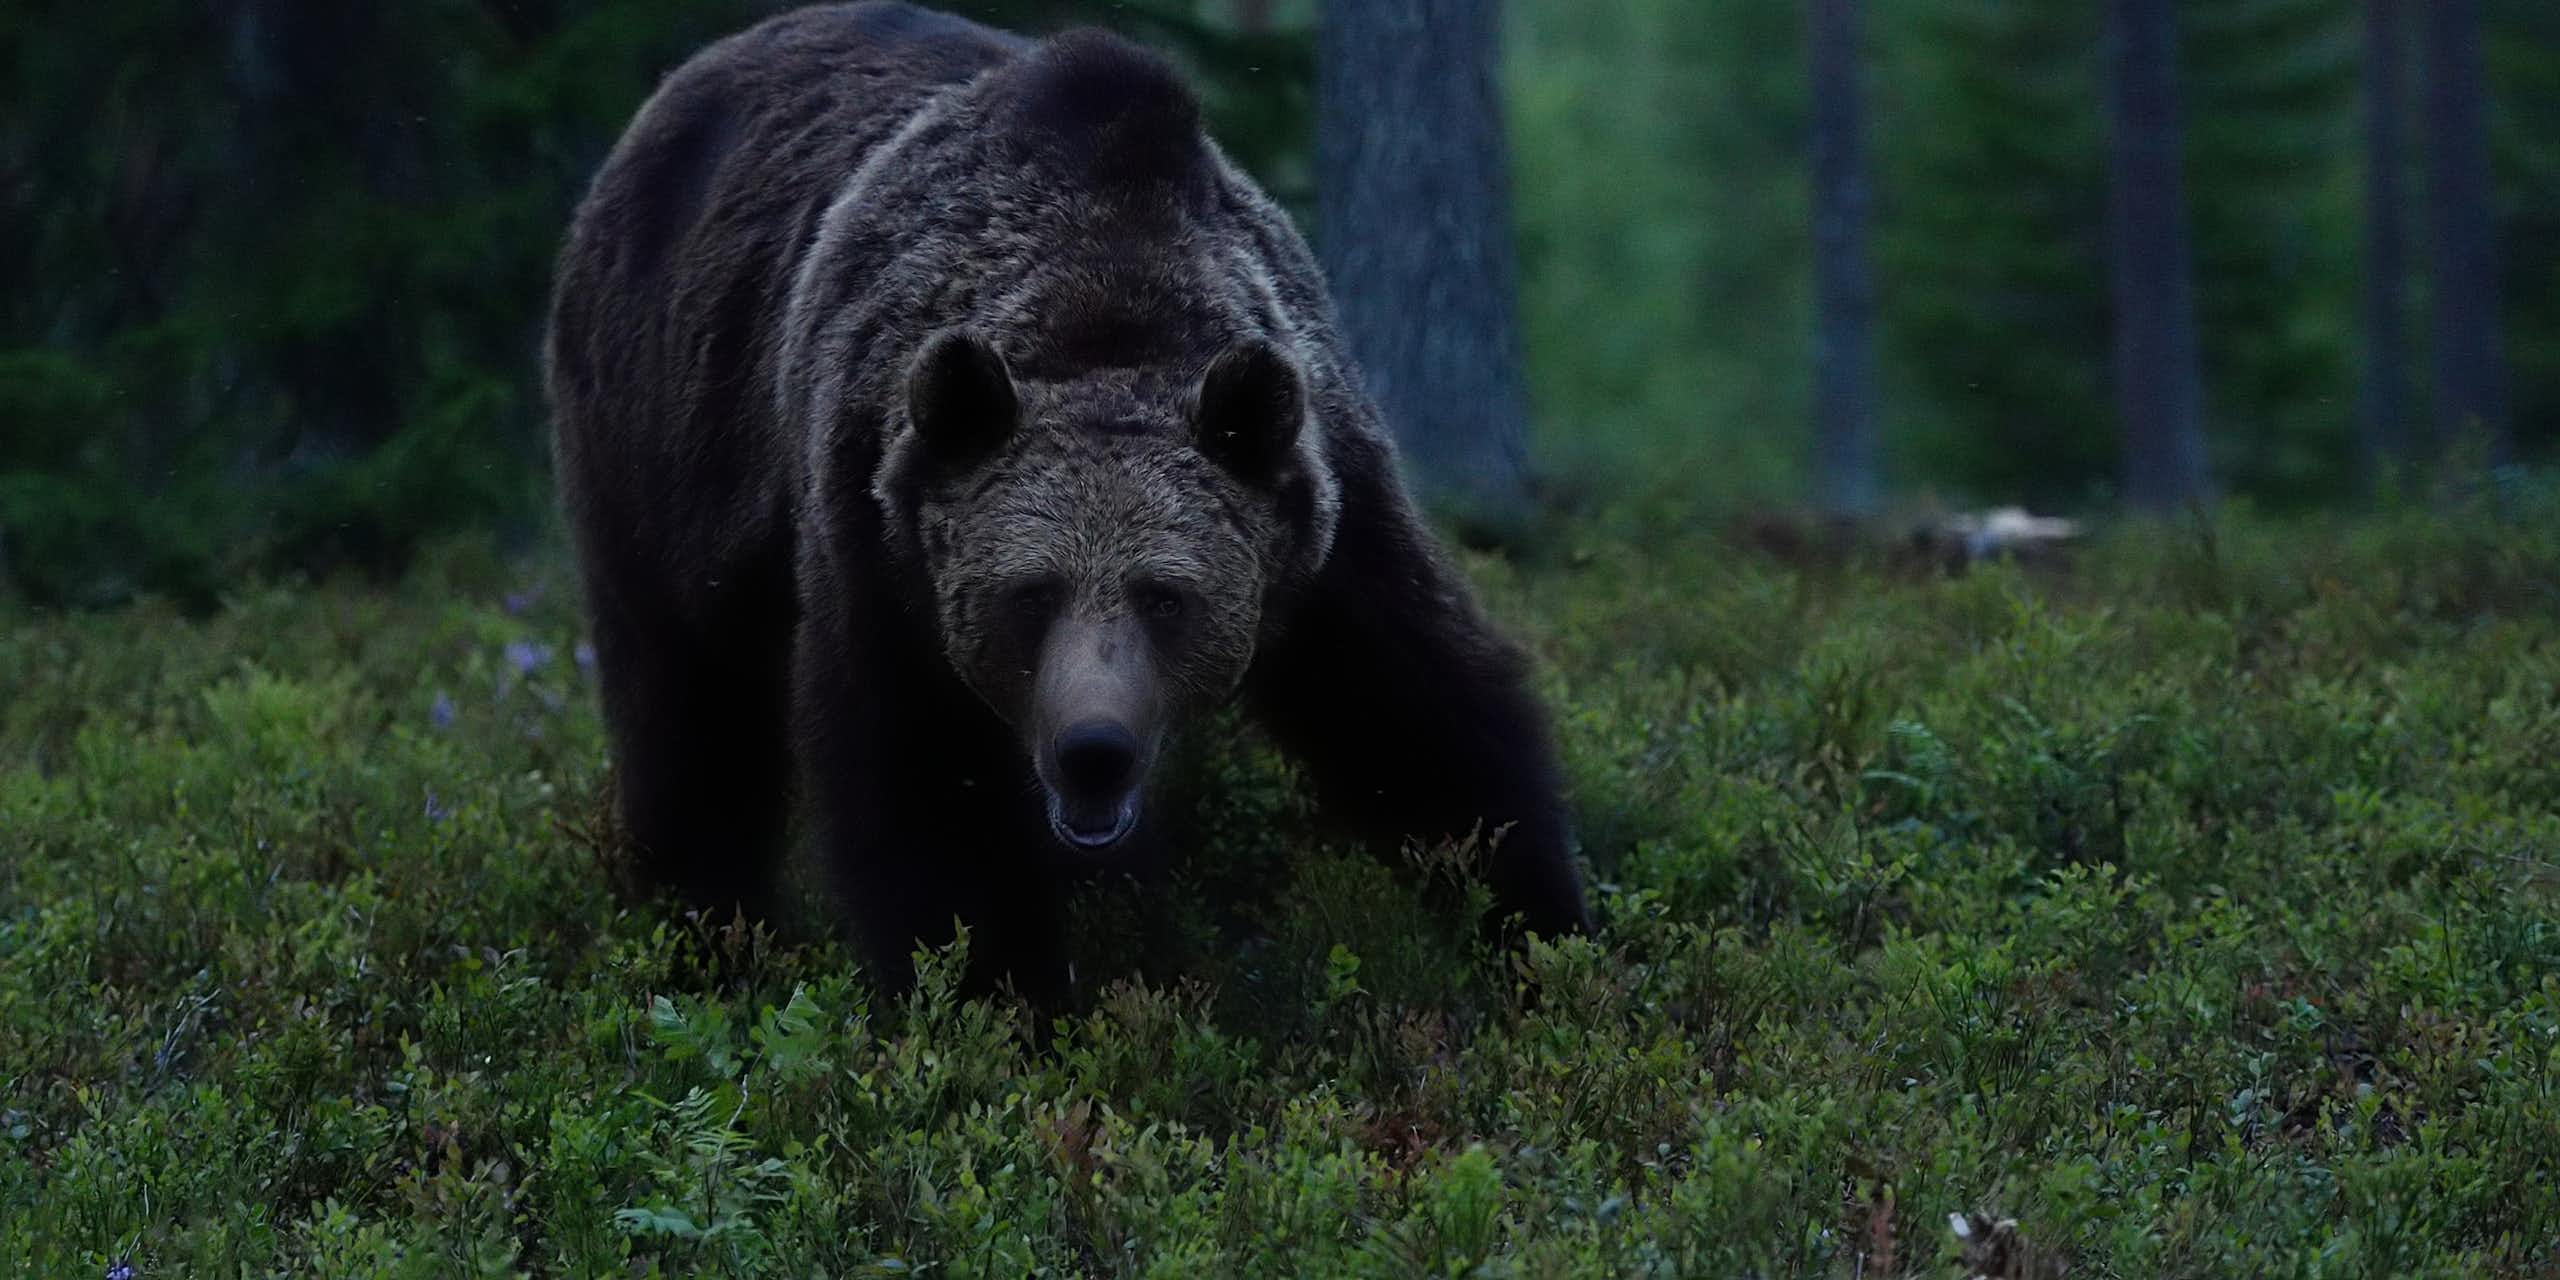 A large and menacing looking bear faces the camera at dusk in a forest